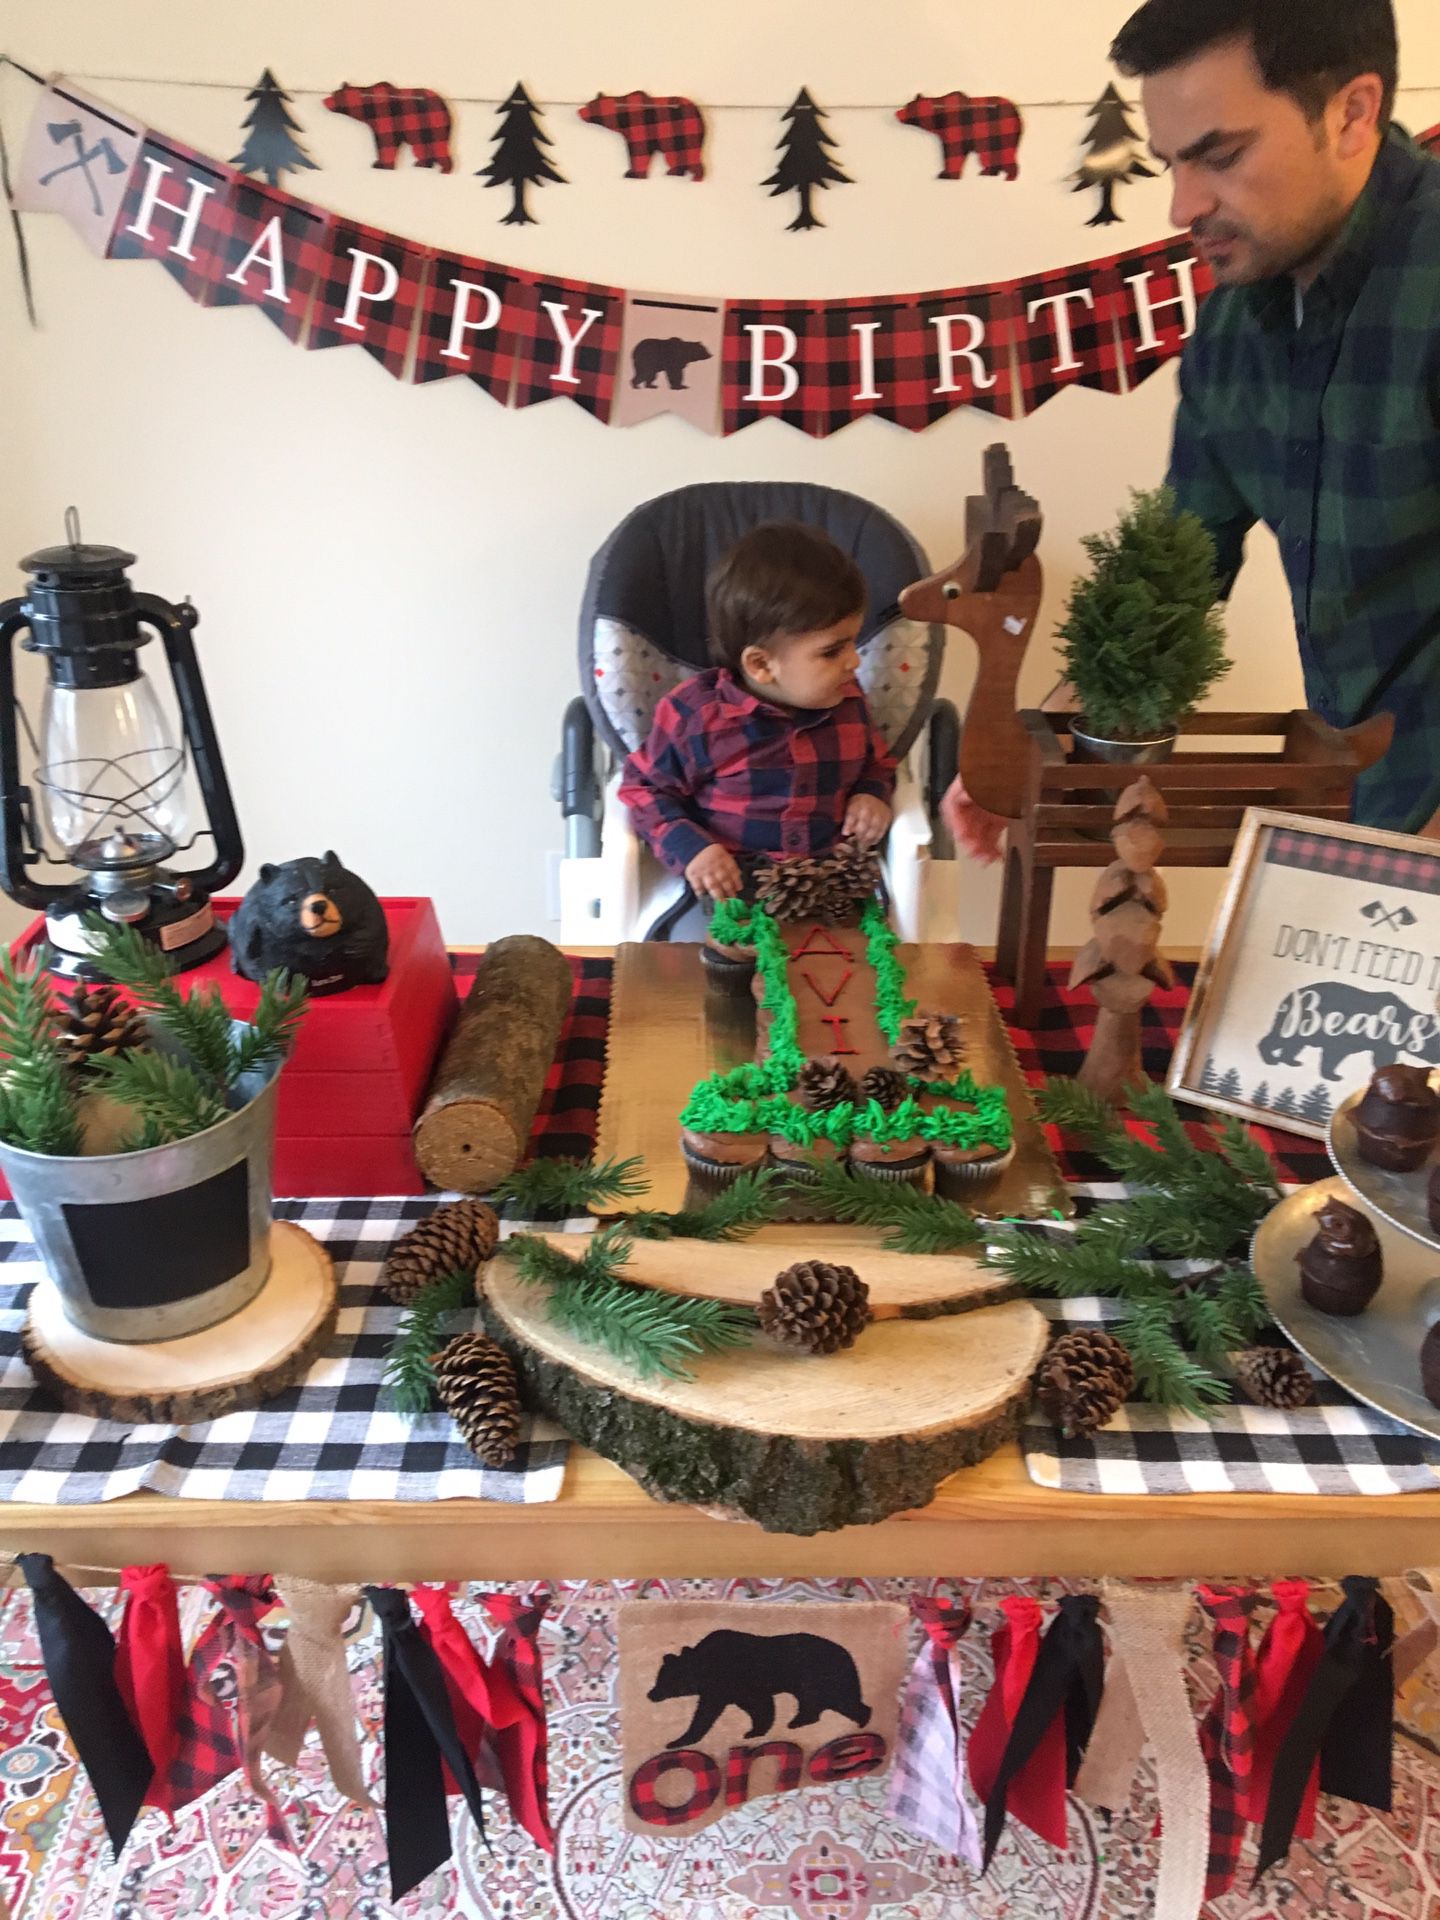 Baby boy birthday decorations (everything but the cake)